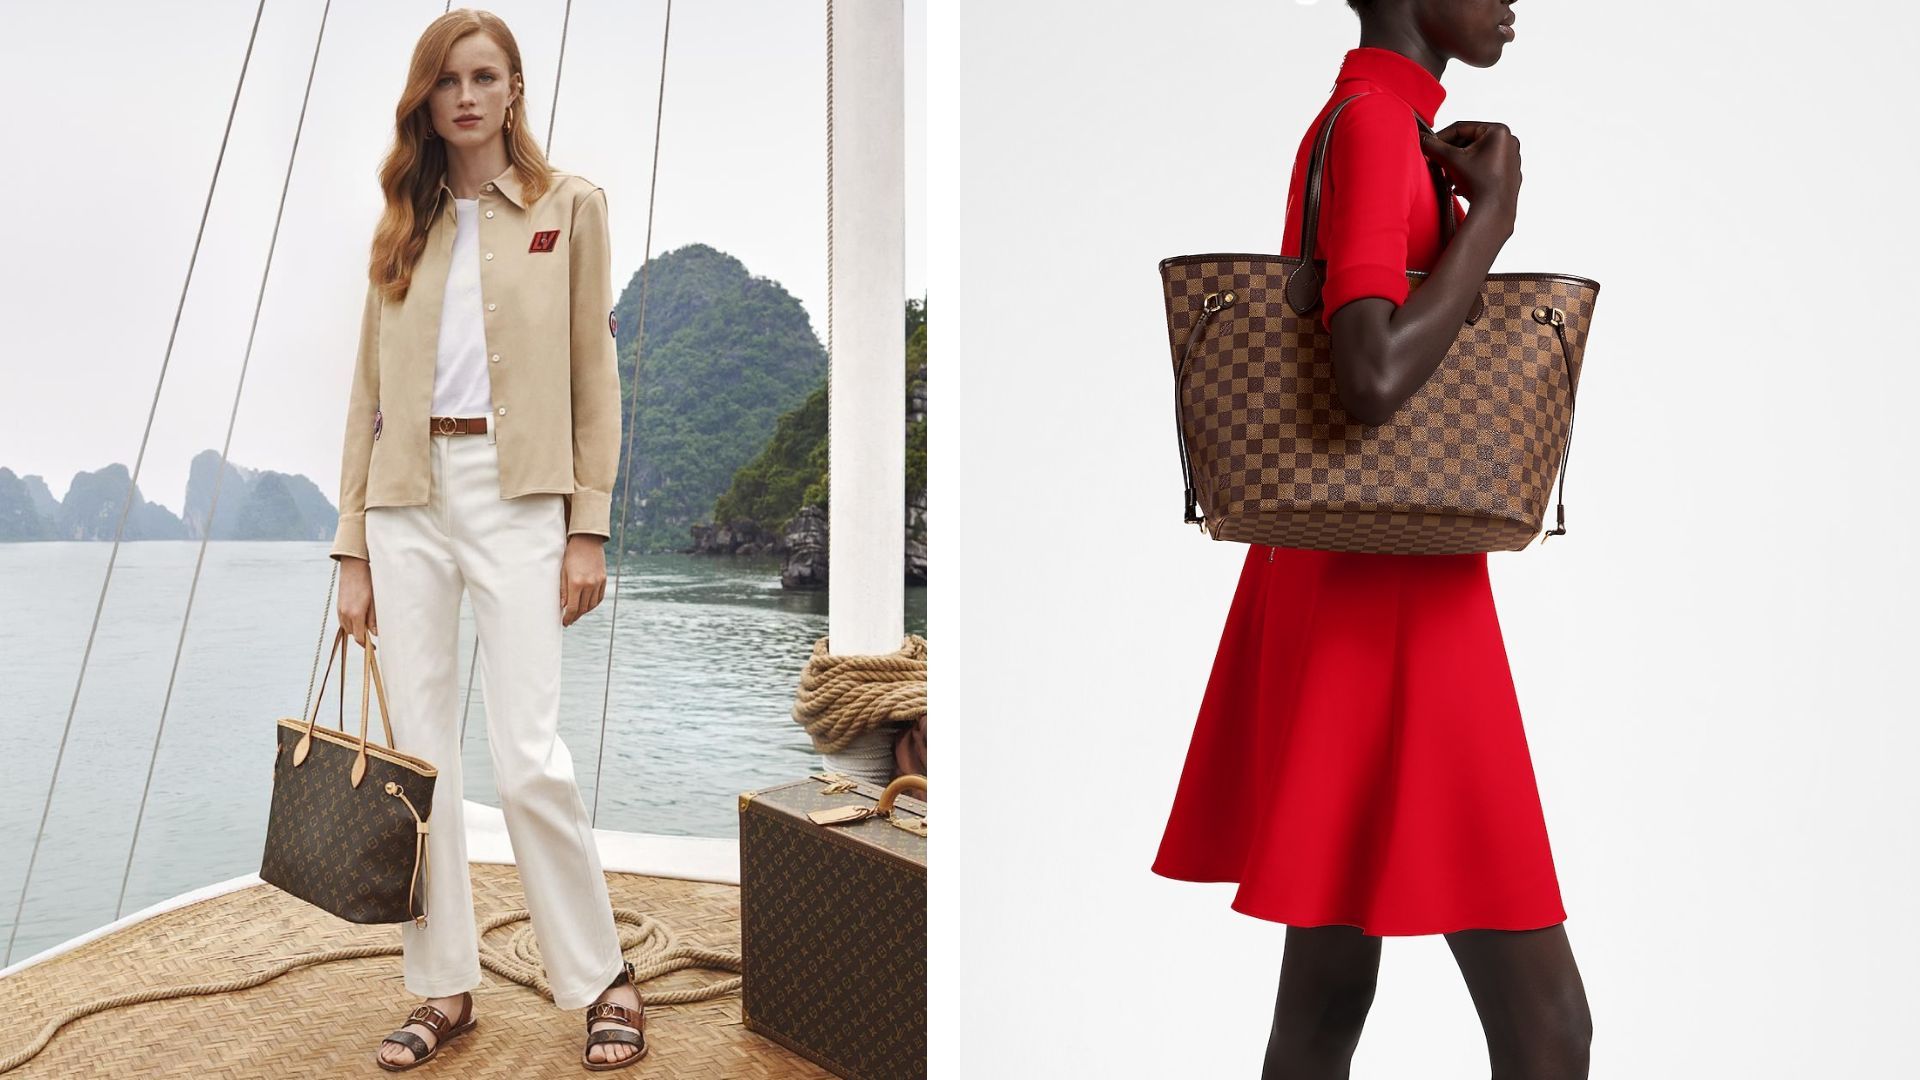 13 Most Popular Louis Vuitton Bags That Are Worth Investing In